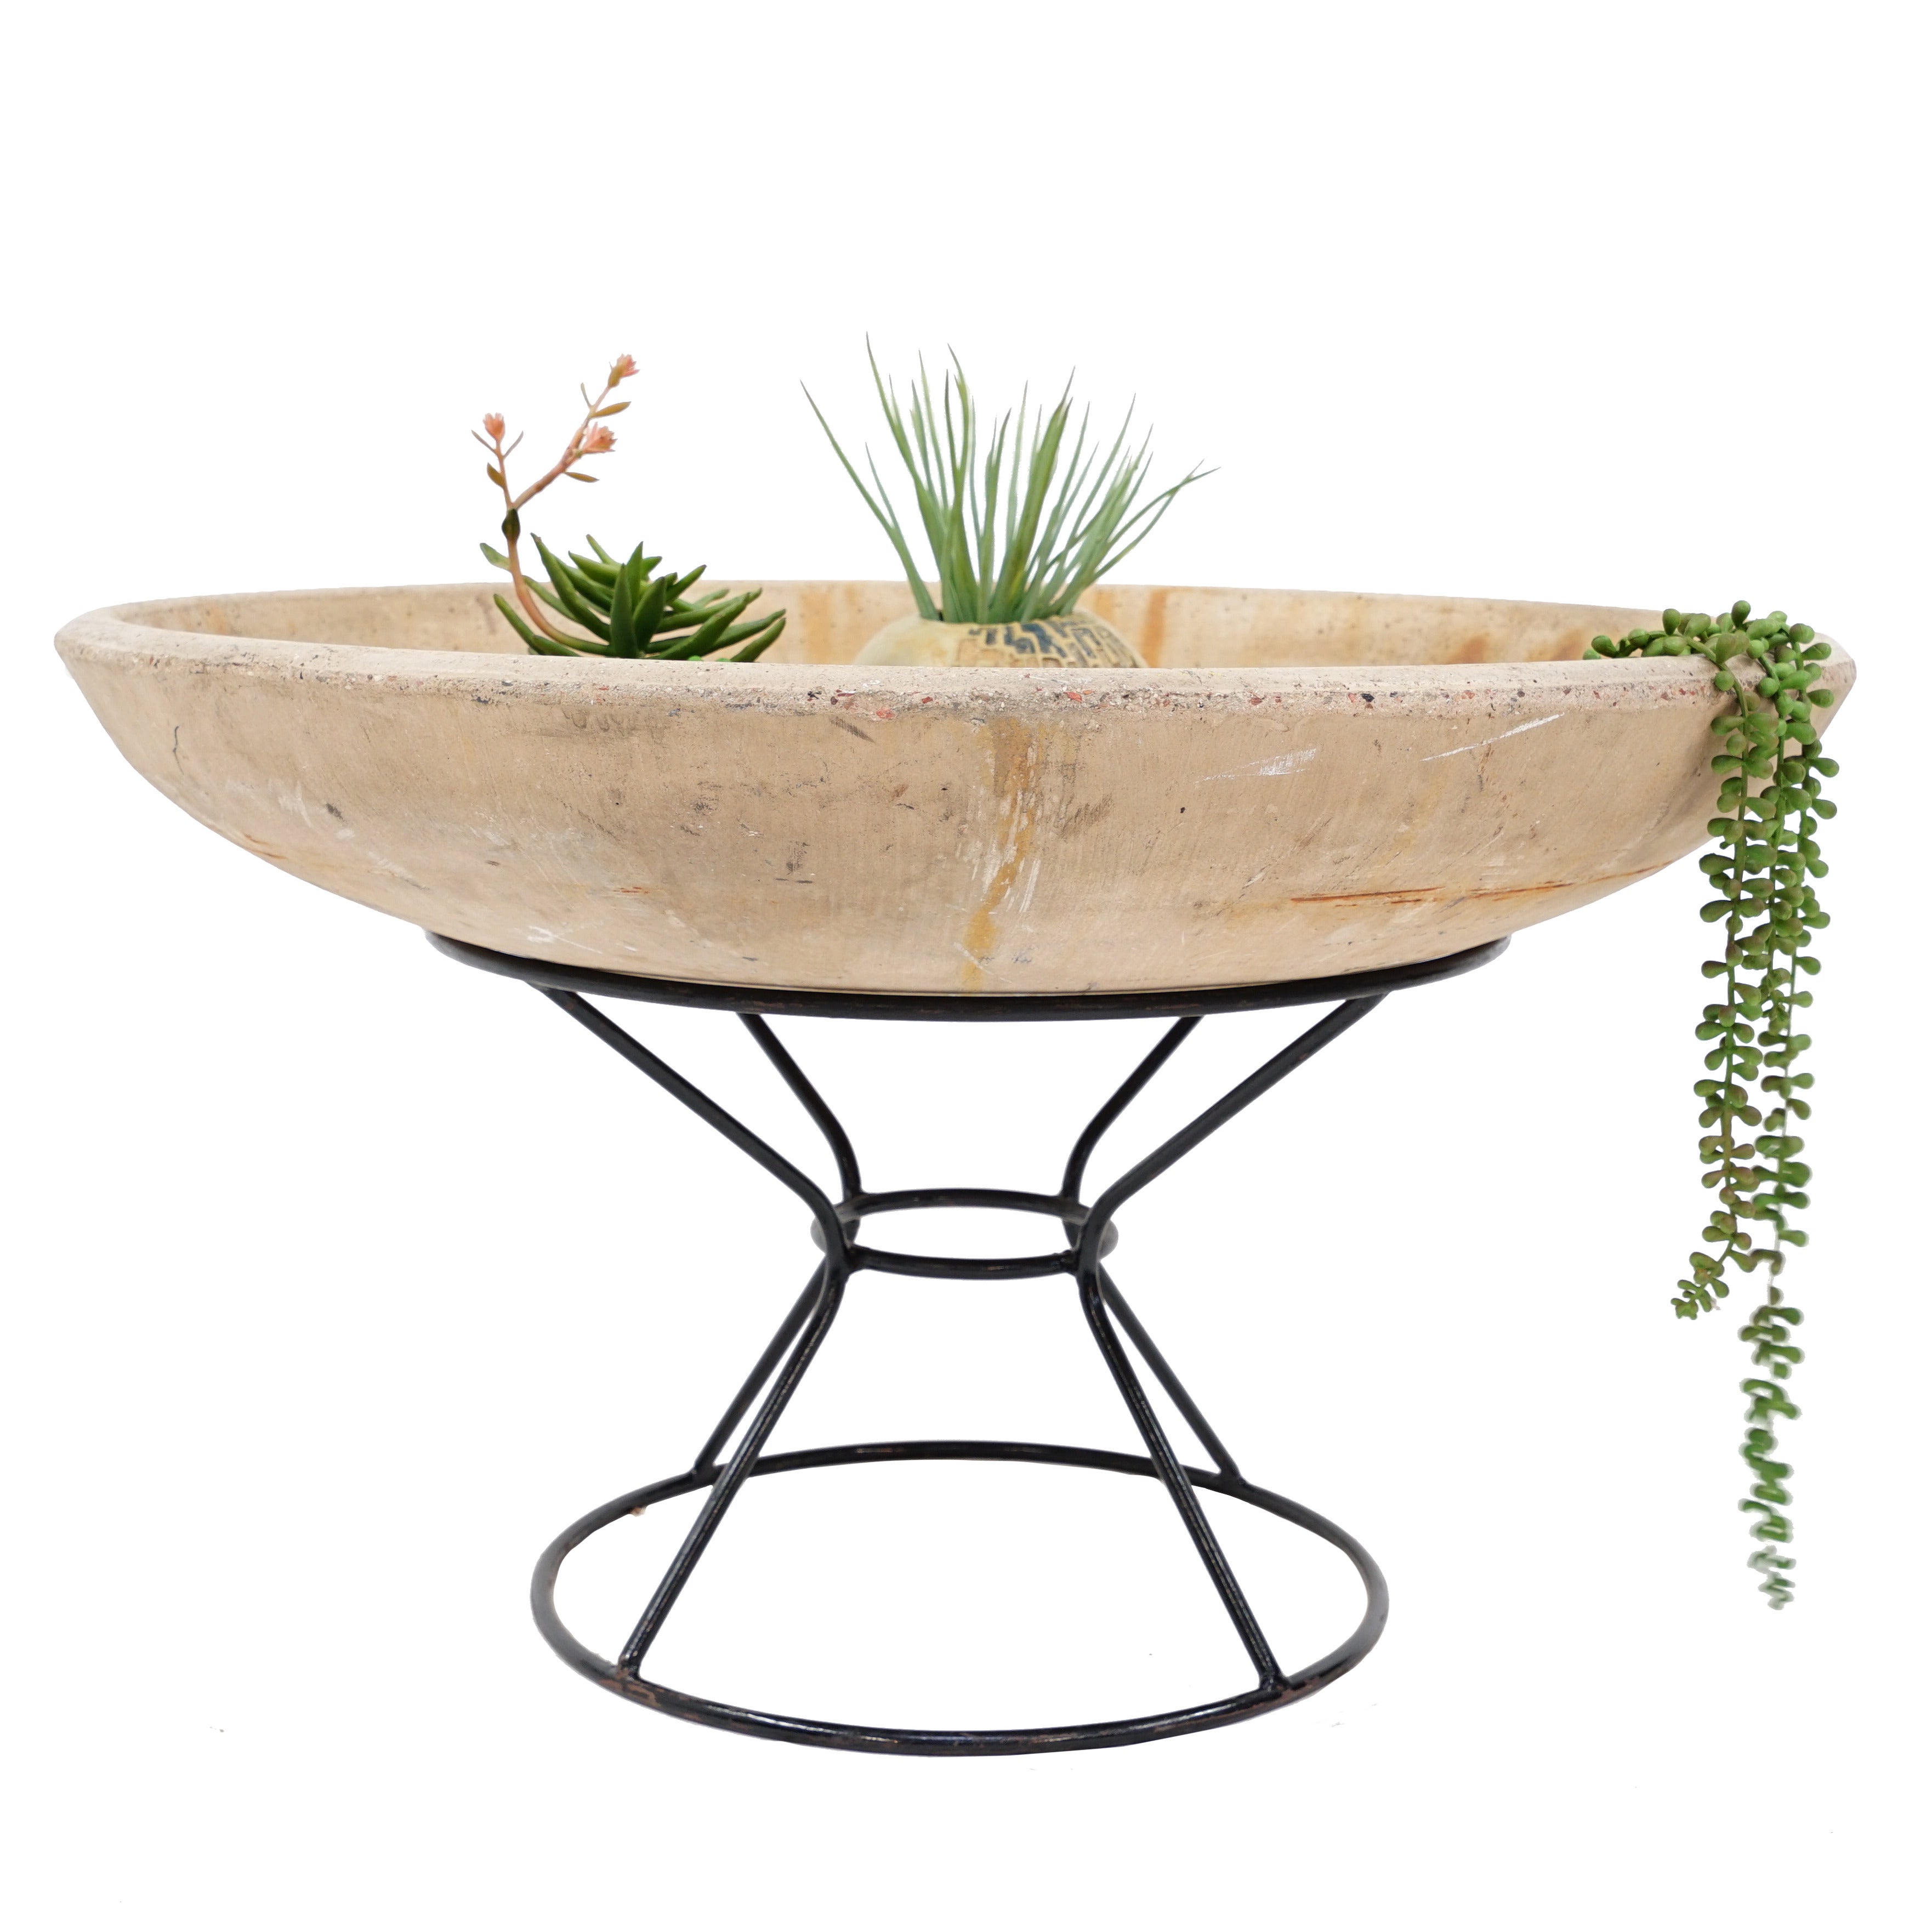 Mid-Century Modern Architectural Iron and Concrete Planter For Sale